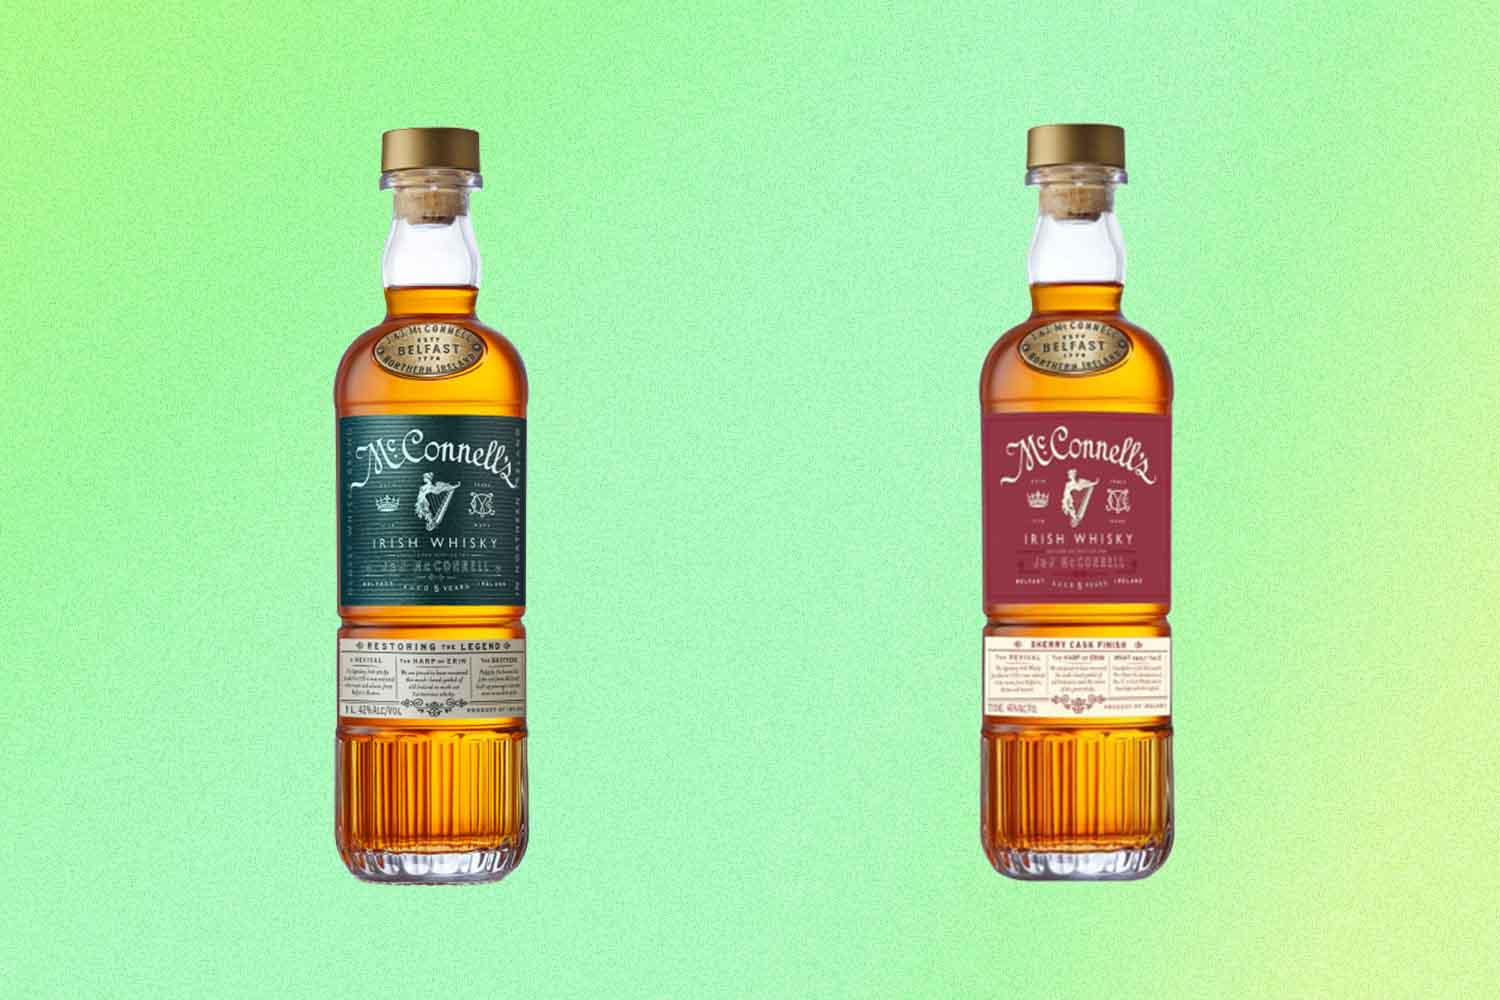 two bottles of McConnell's Irish Whisky